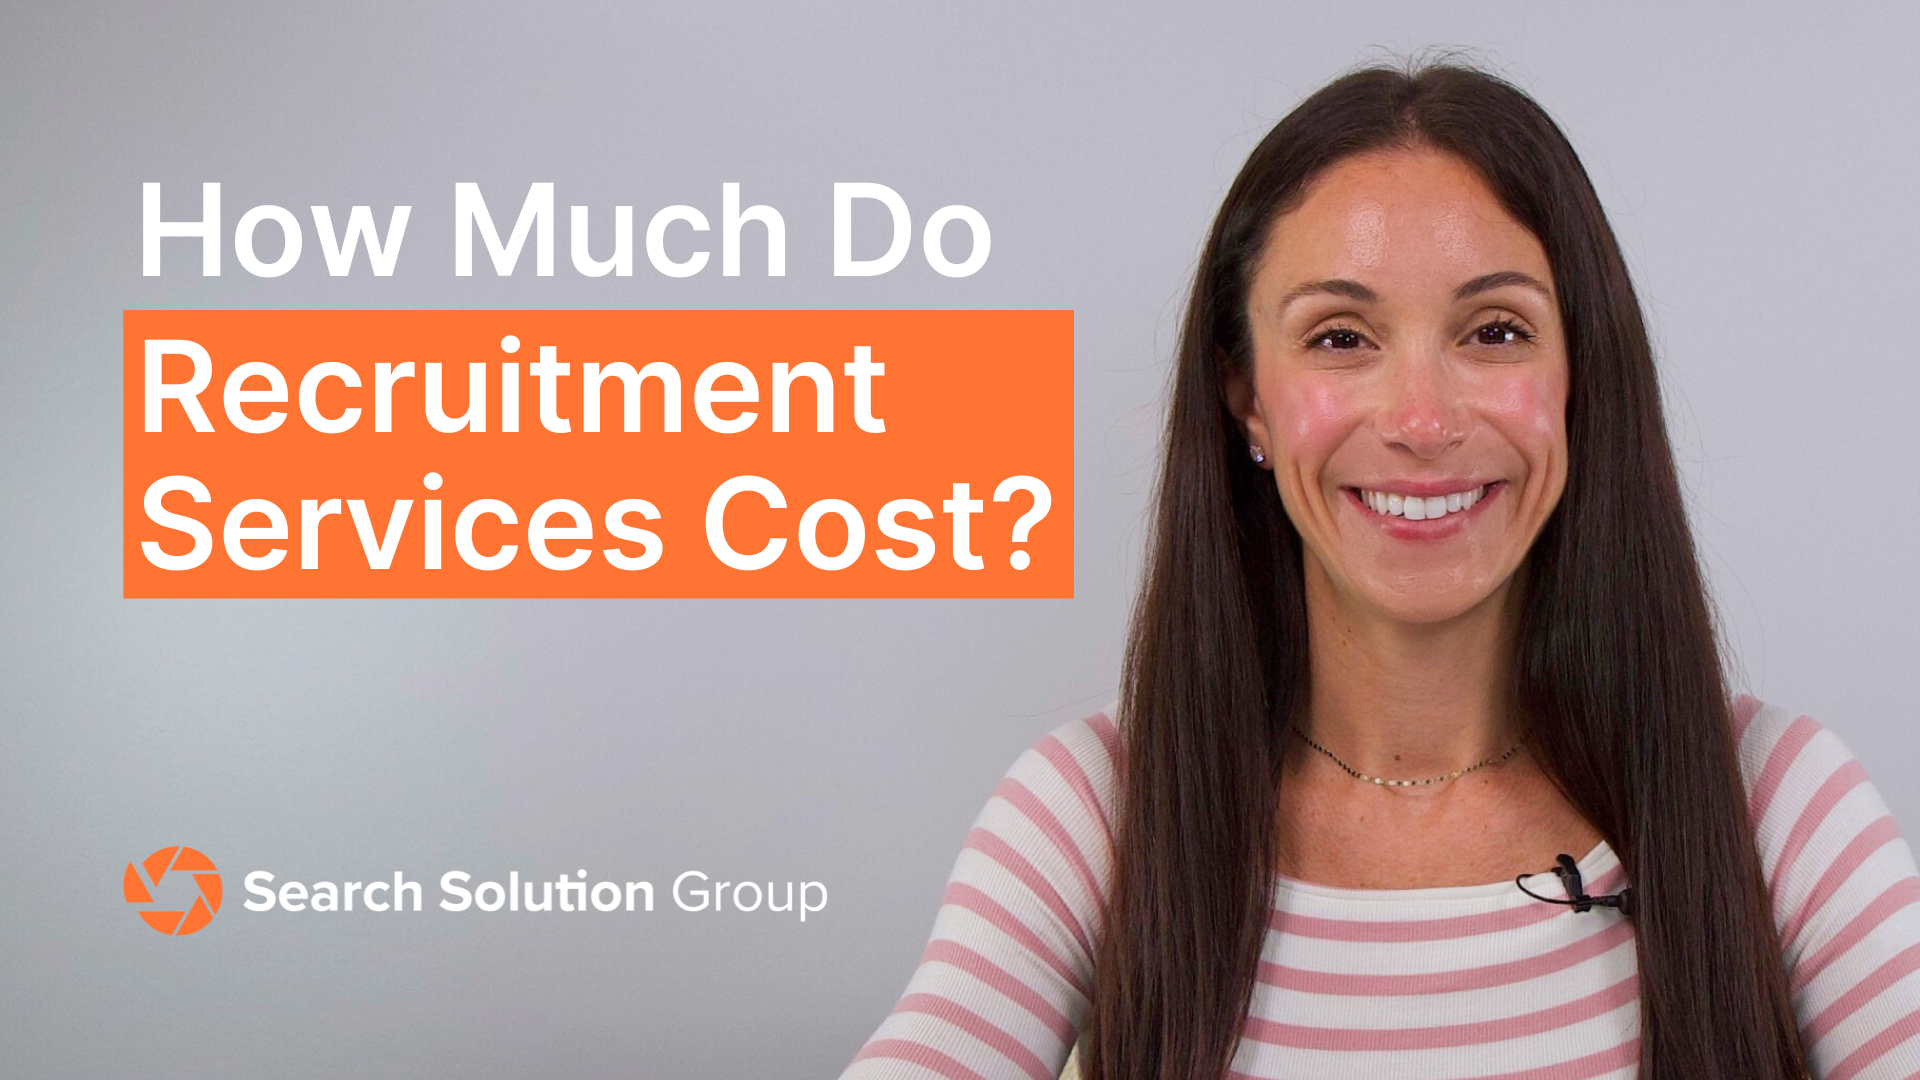 How Much Do Recruitment Services Cost